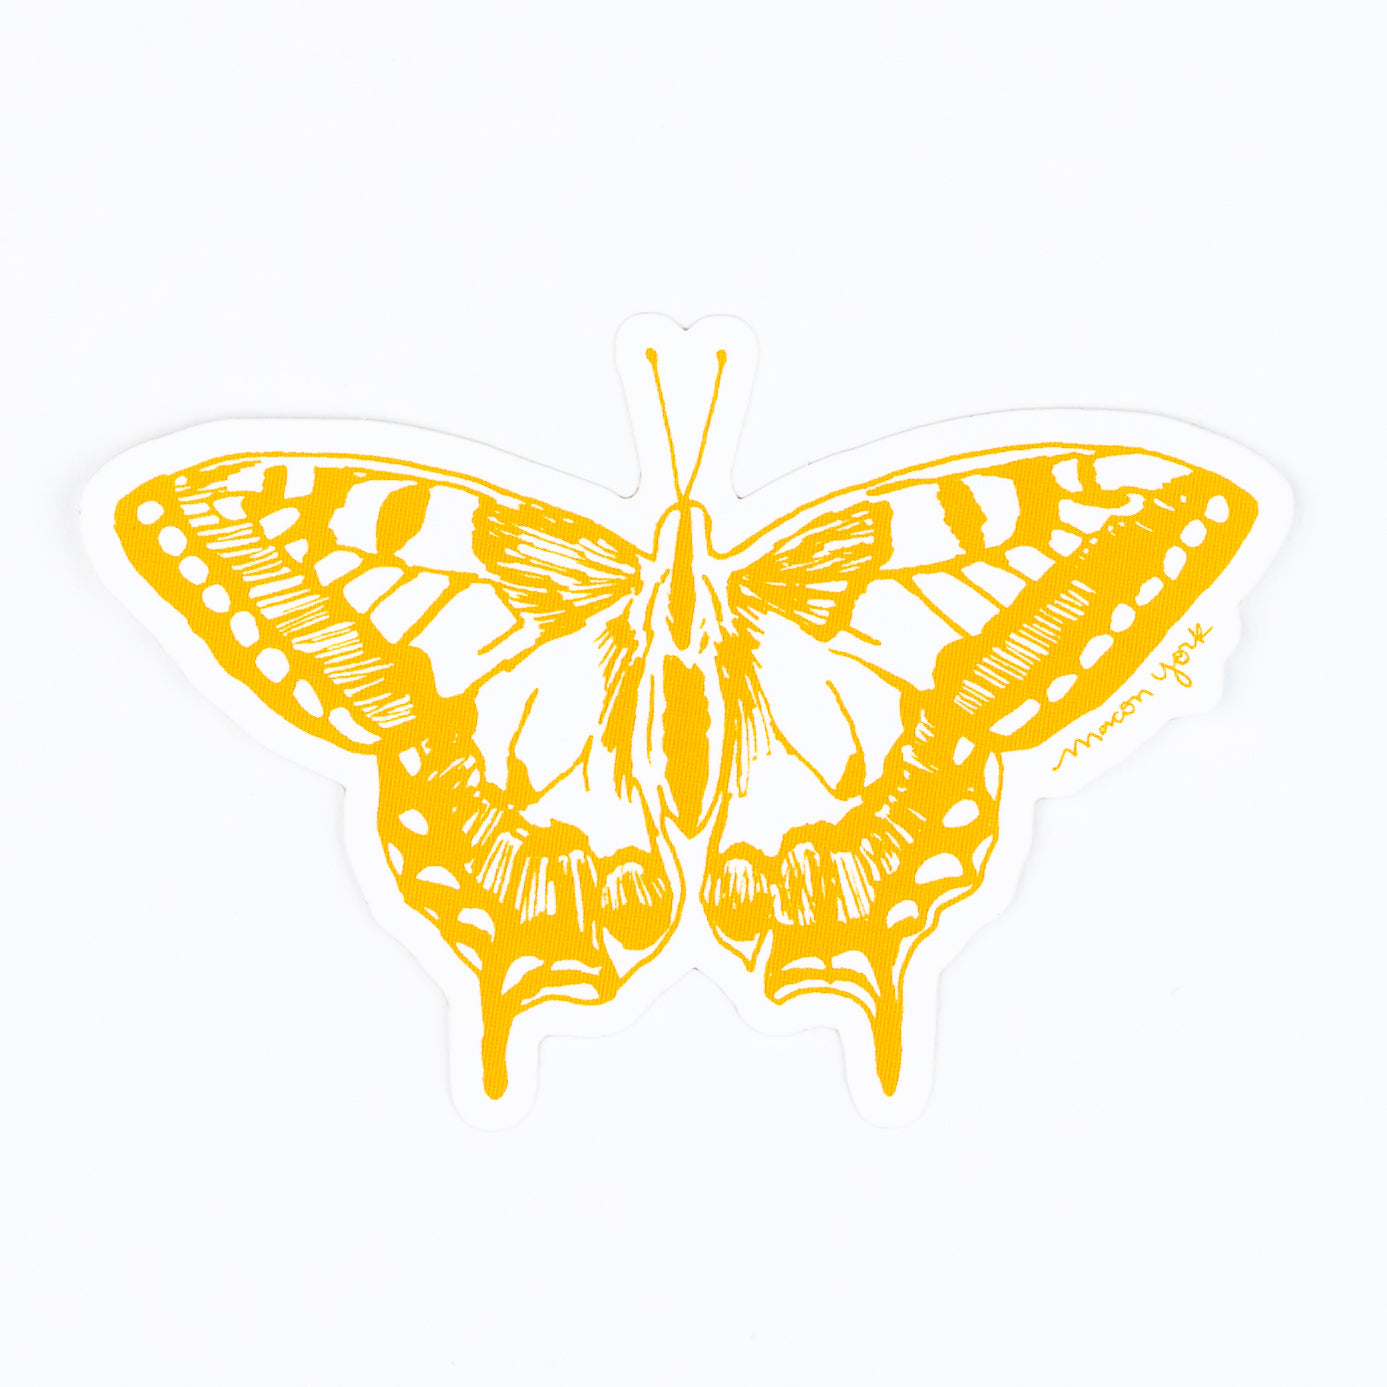 This Swallowtail sticker is a premium vinyl sticker that captures the beauty of the summertime Appalachian mountains. It features a hand-drawn image of the iconic swallowtail butterfly, perfect for those who appreciate the natural wonders of the region. Mustard gold ink. 